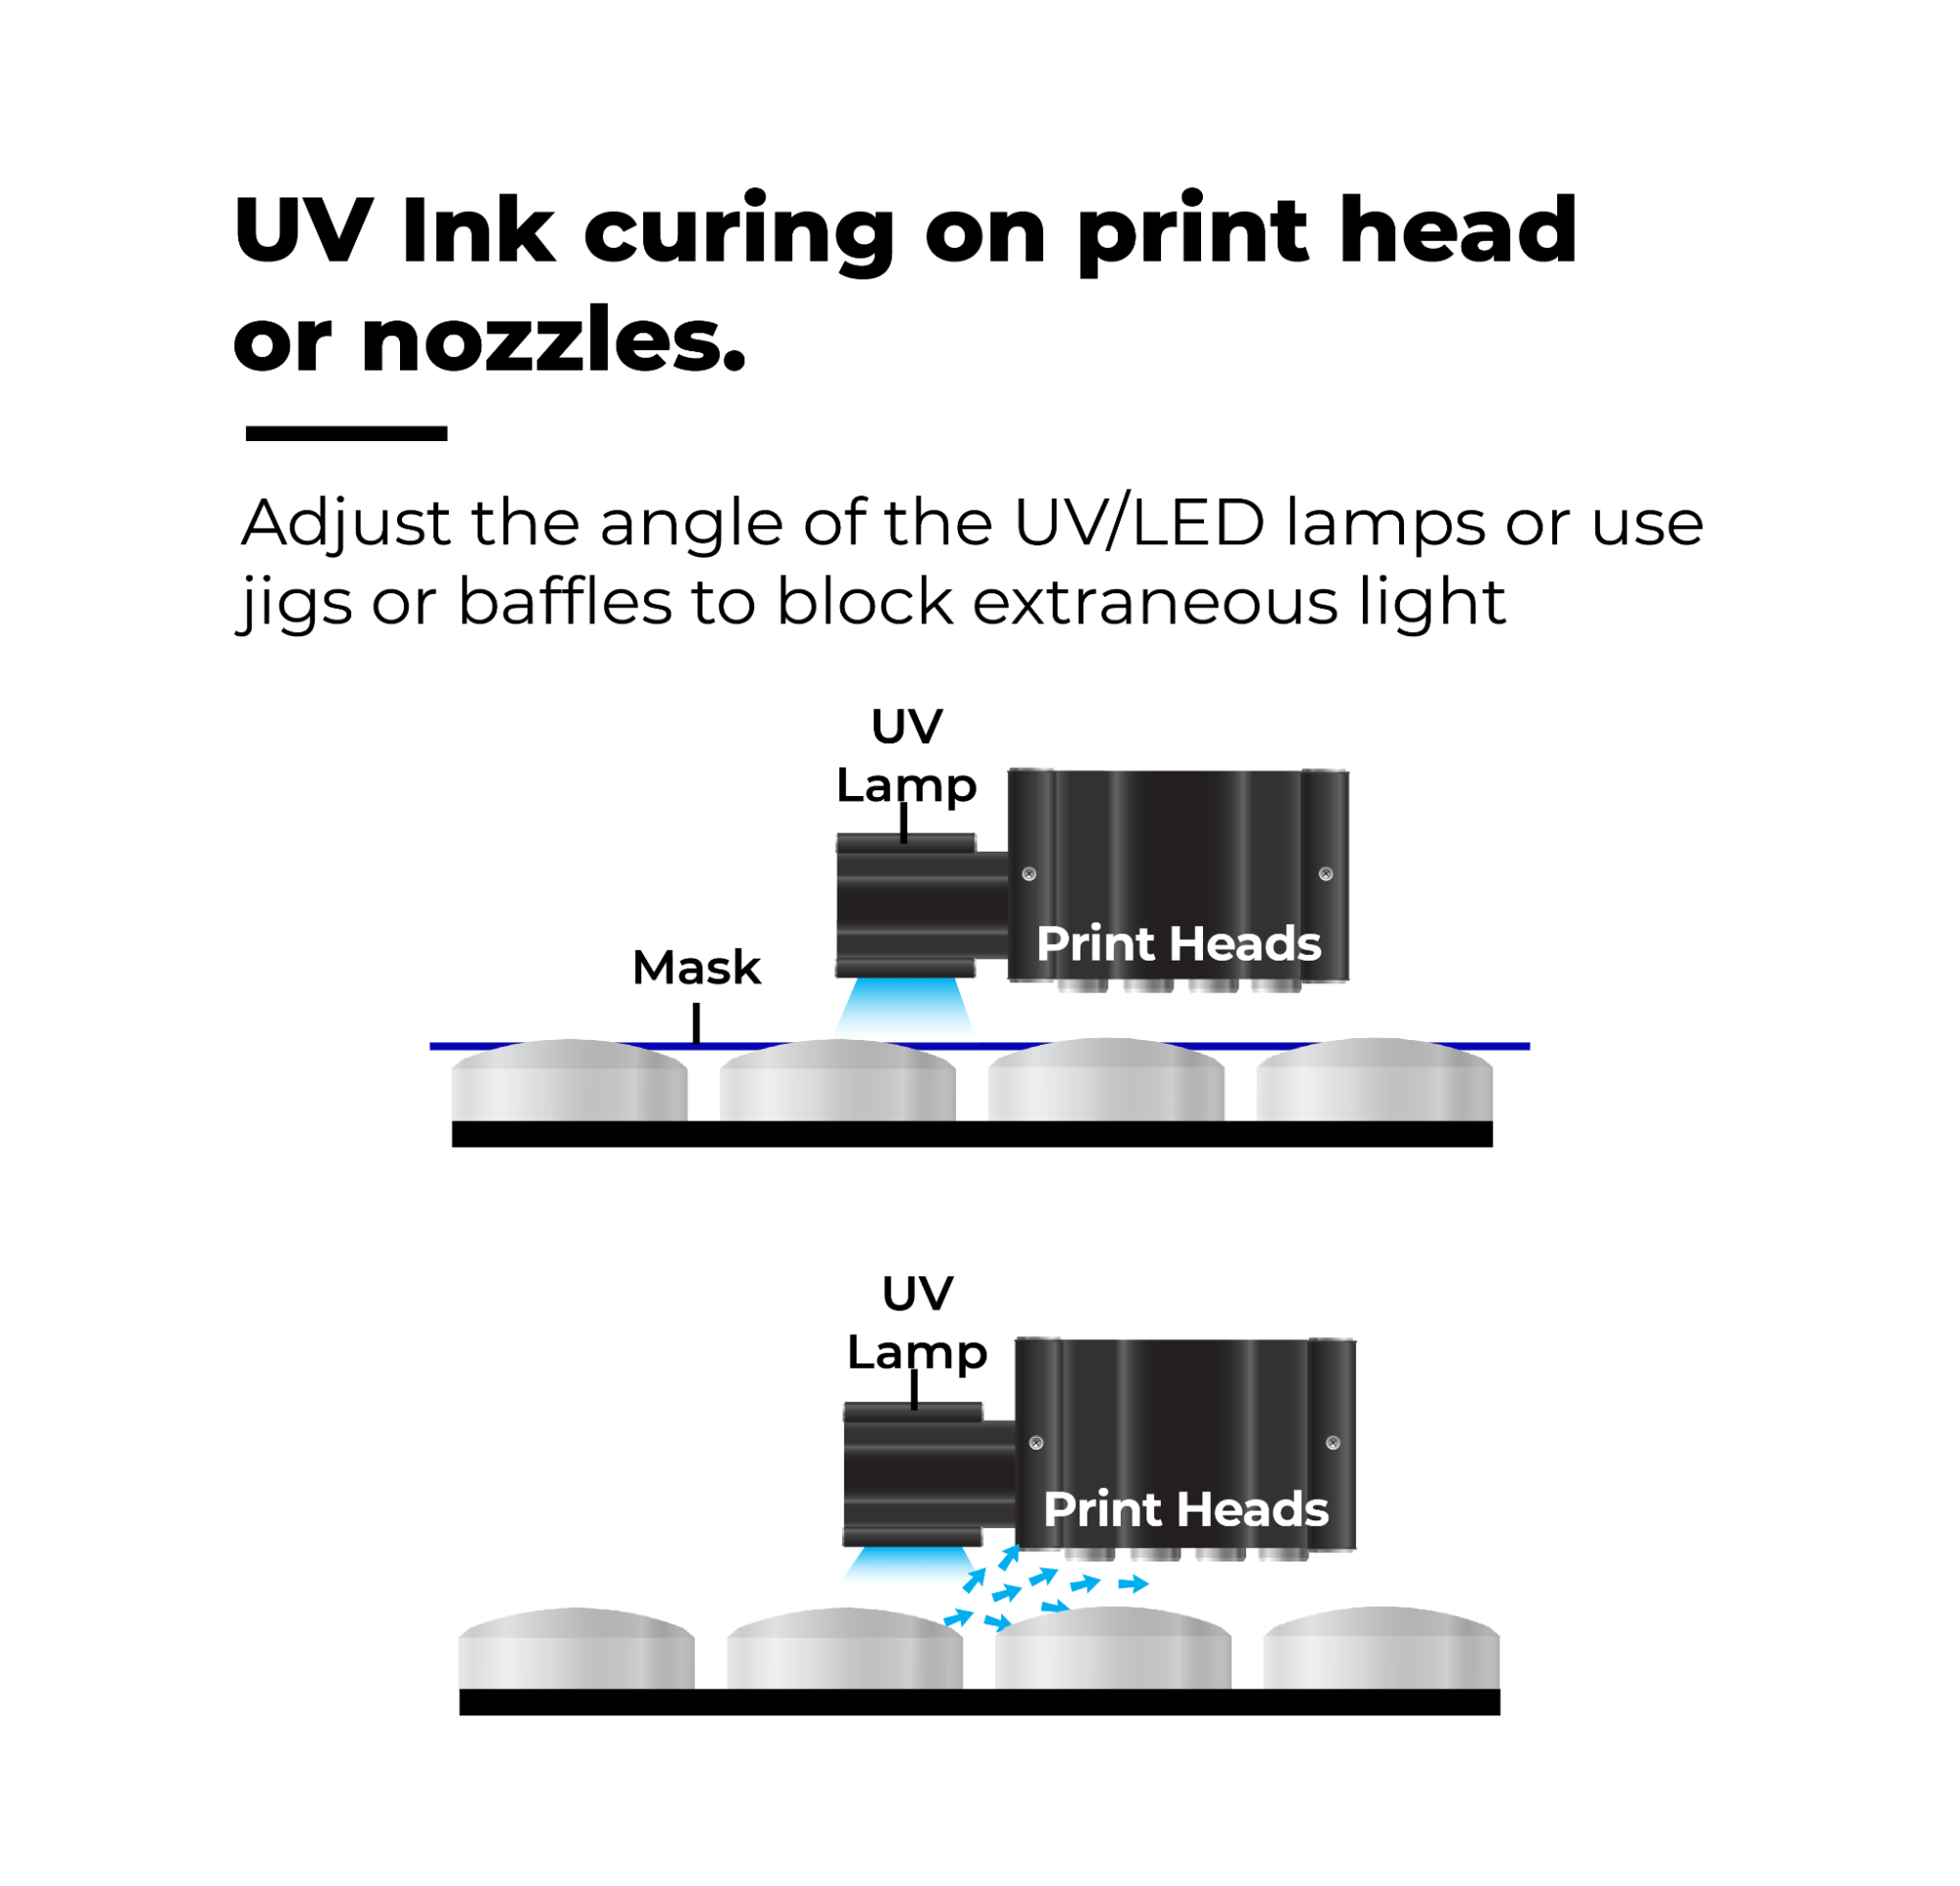 Image of uv ink curing on a printhead